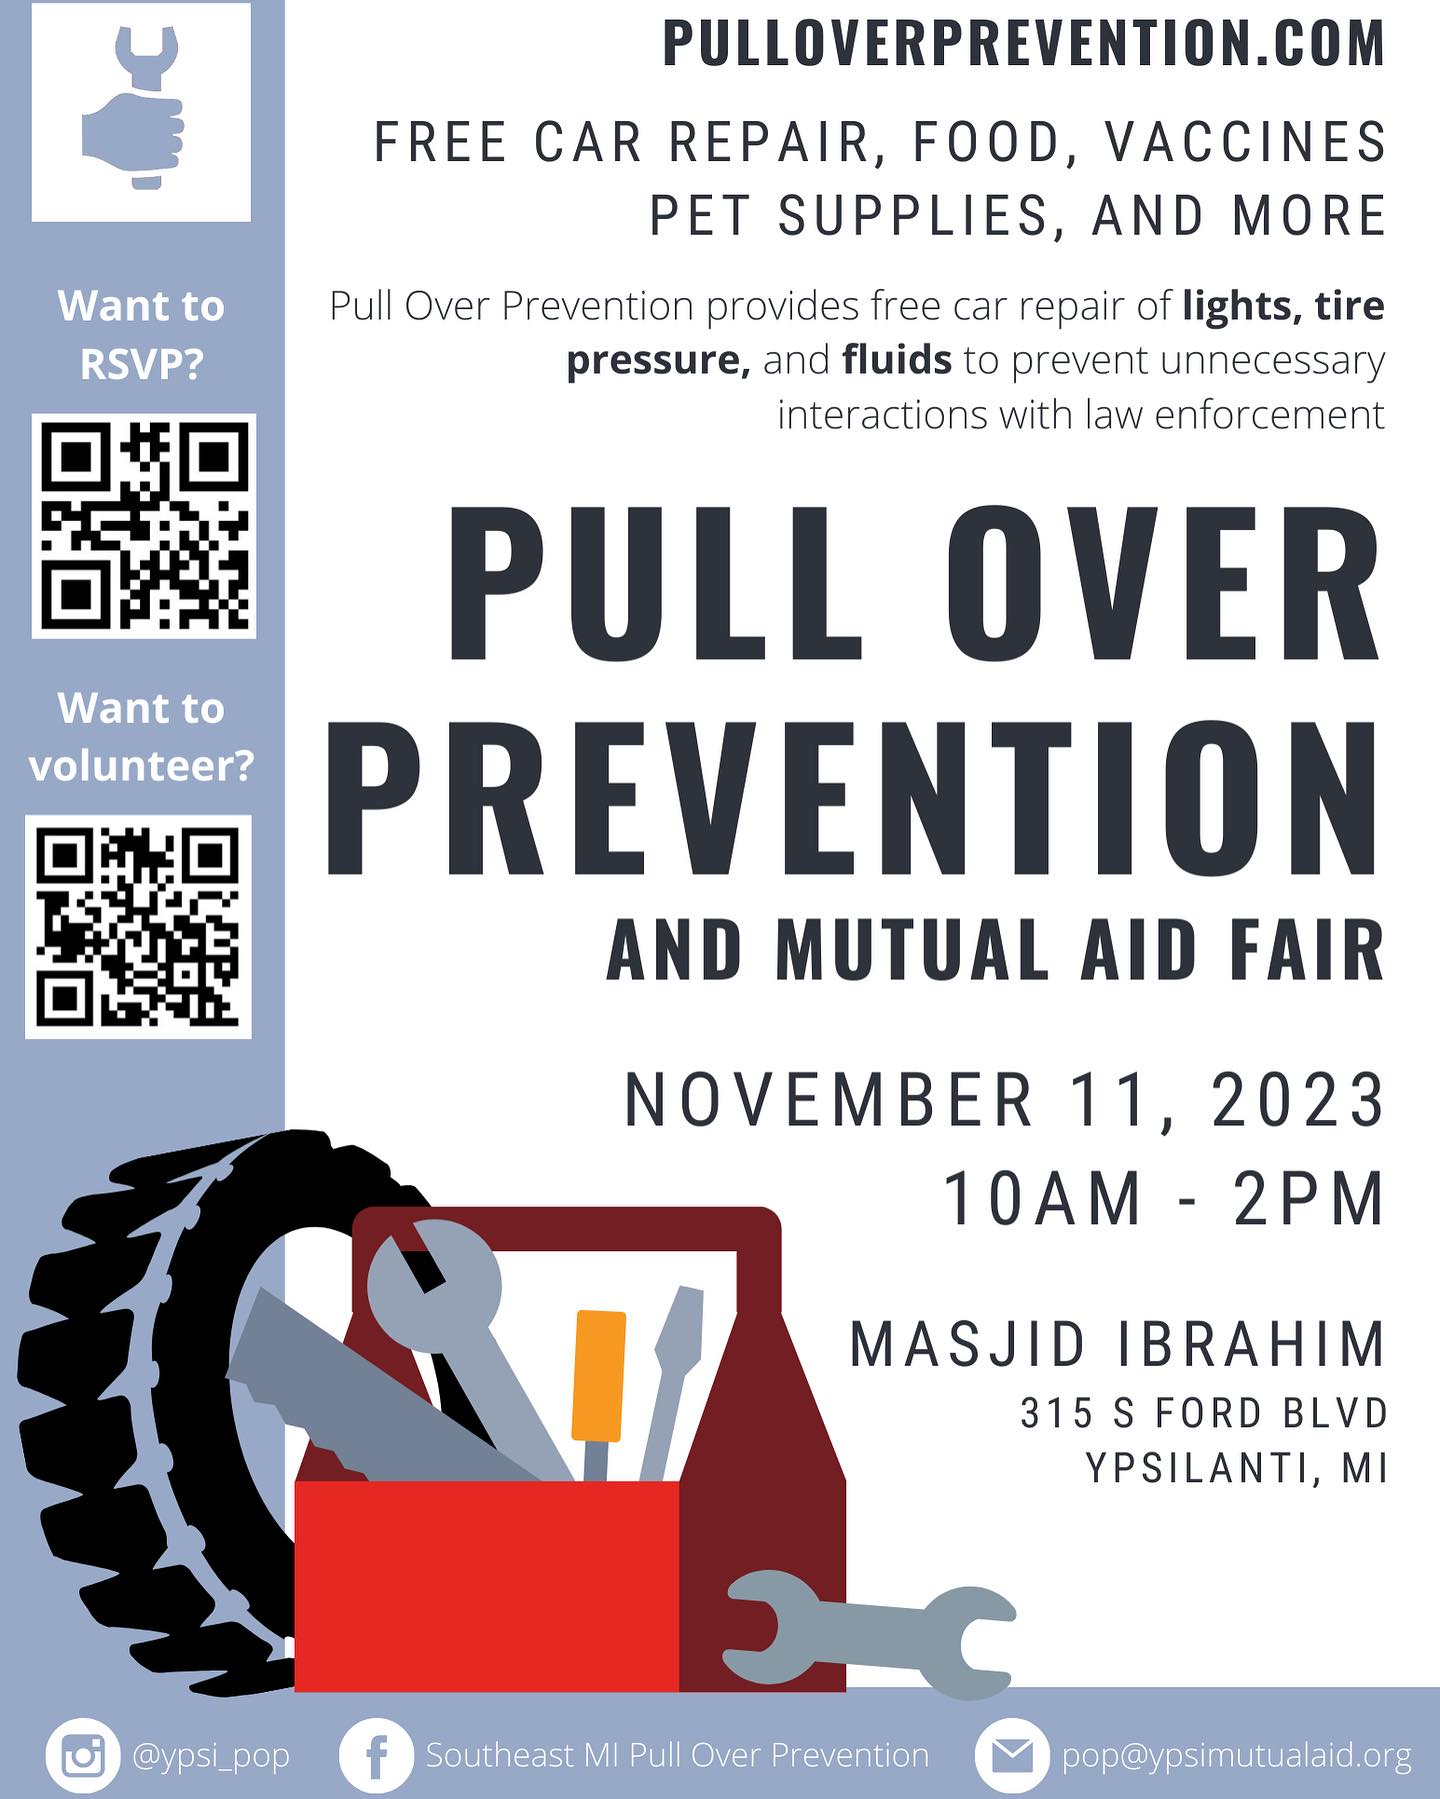 PULL OVER PREVENTION AND MUTUAL AID FAIR in Ypsilanti!